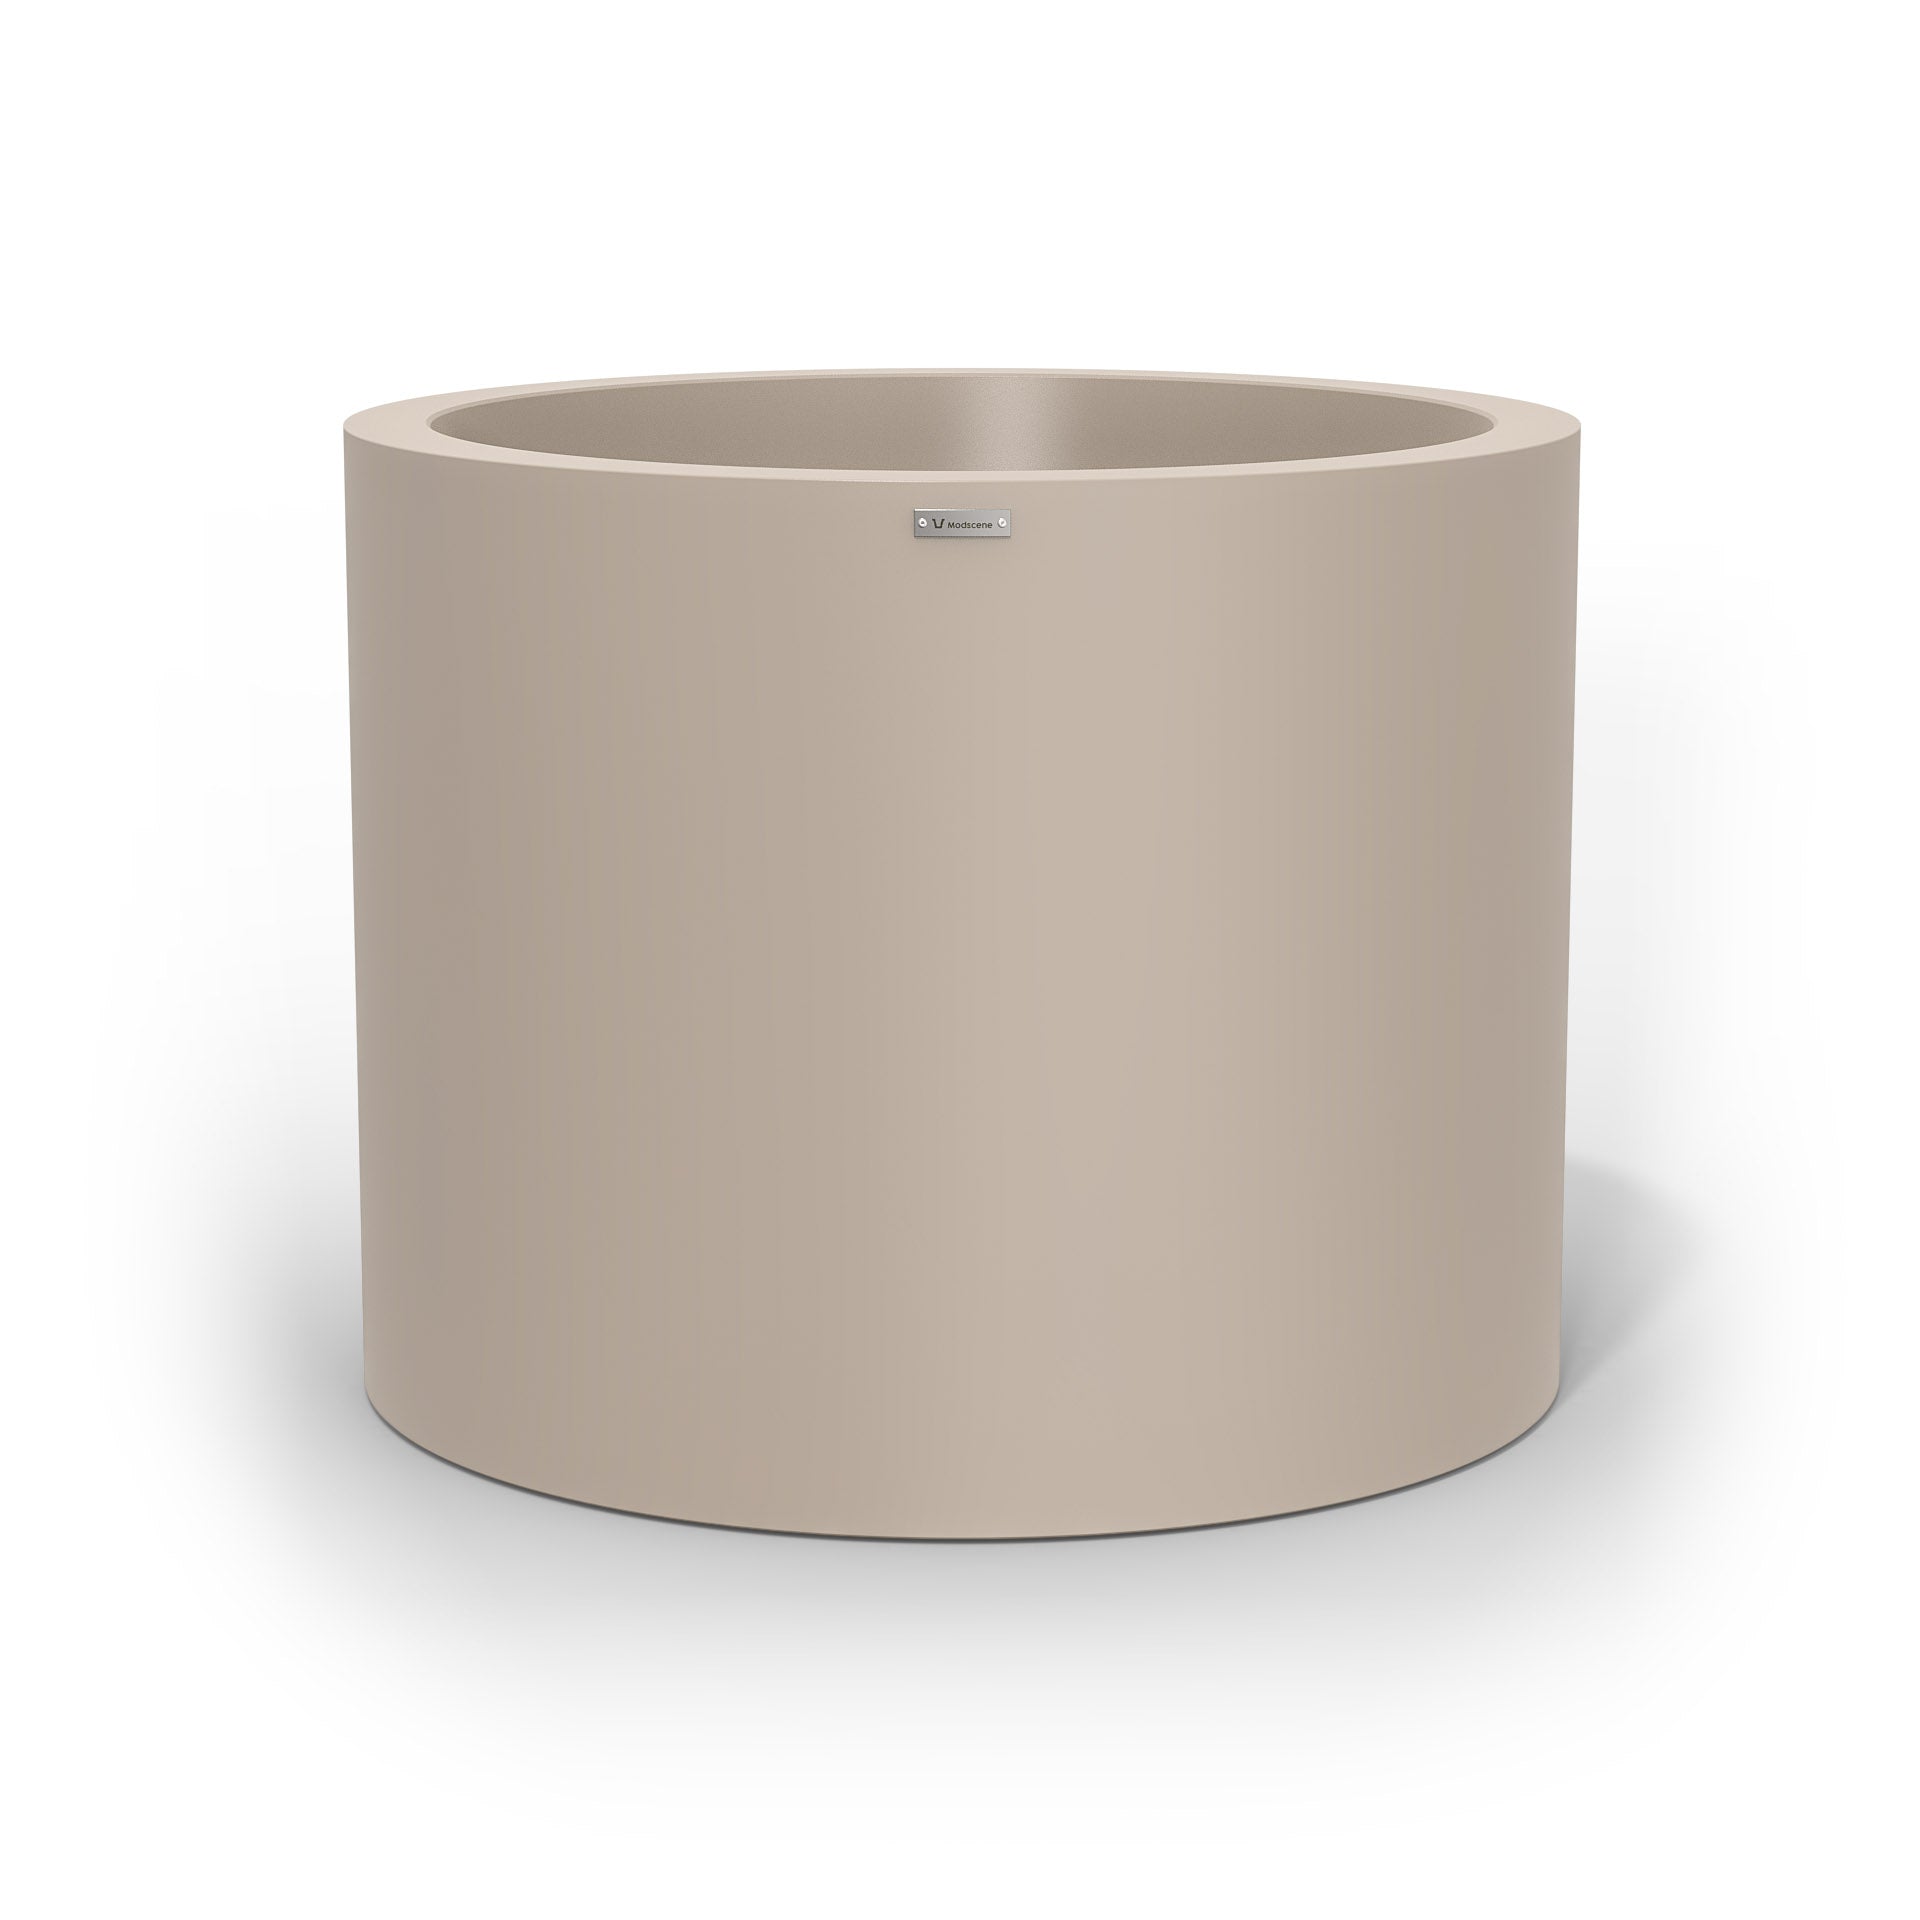 A giant cylinder pot planter in a sandstone colour. Made in New Zealand.